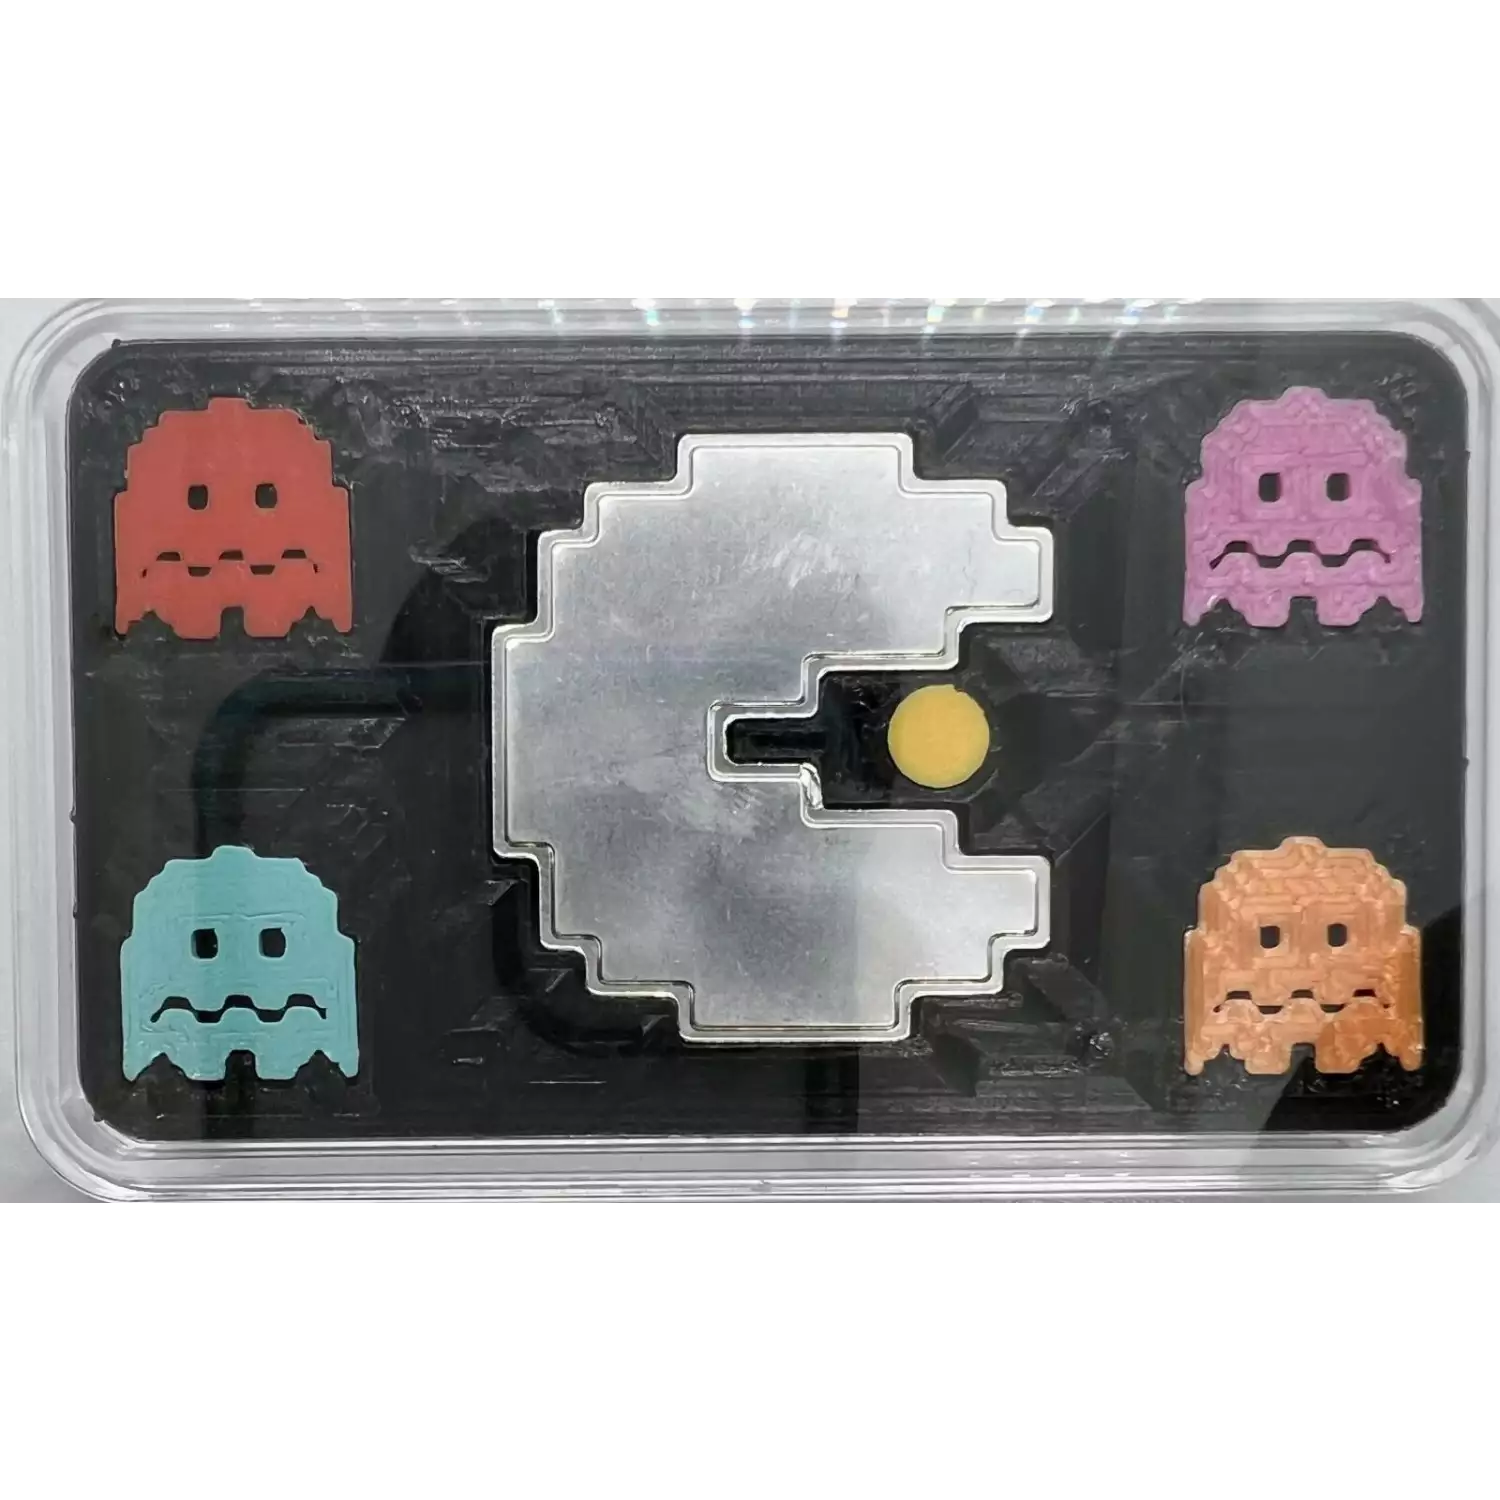 2021 Niue 1 oz Silver $2 PAC-MAN™ Shaped In CUSTOM CASE PAC STACK Stackable Coin